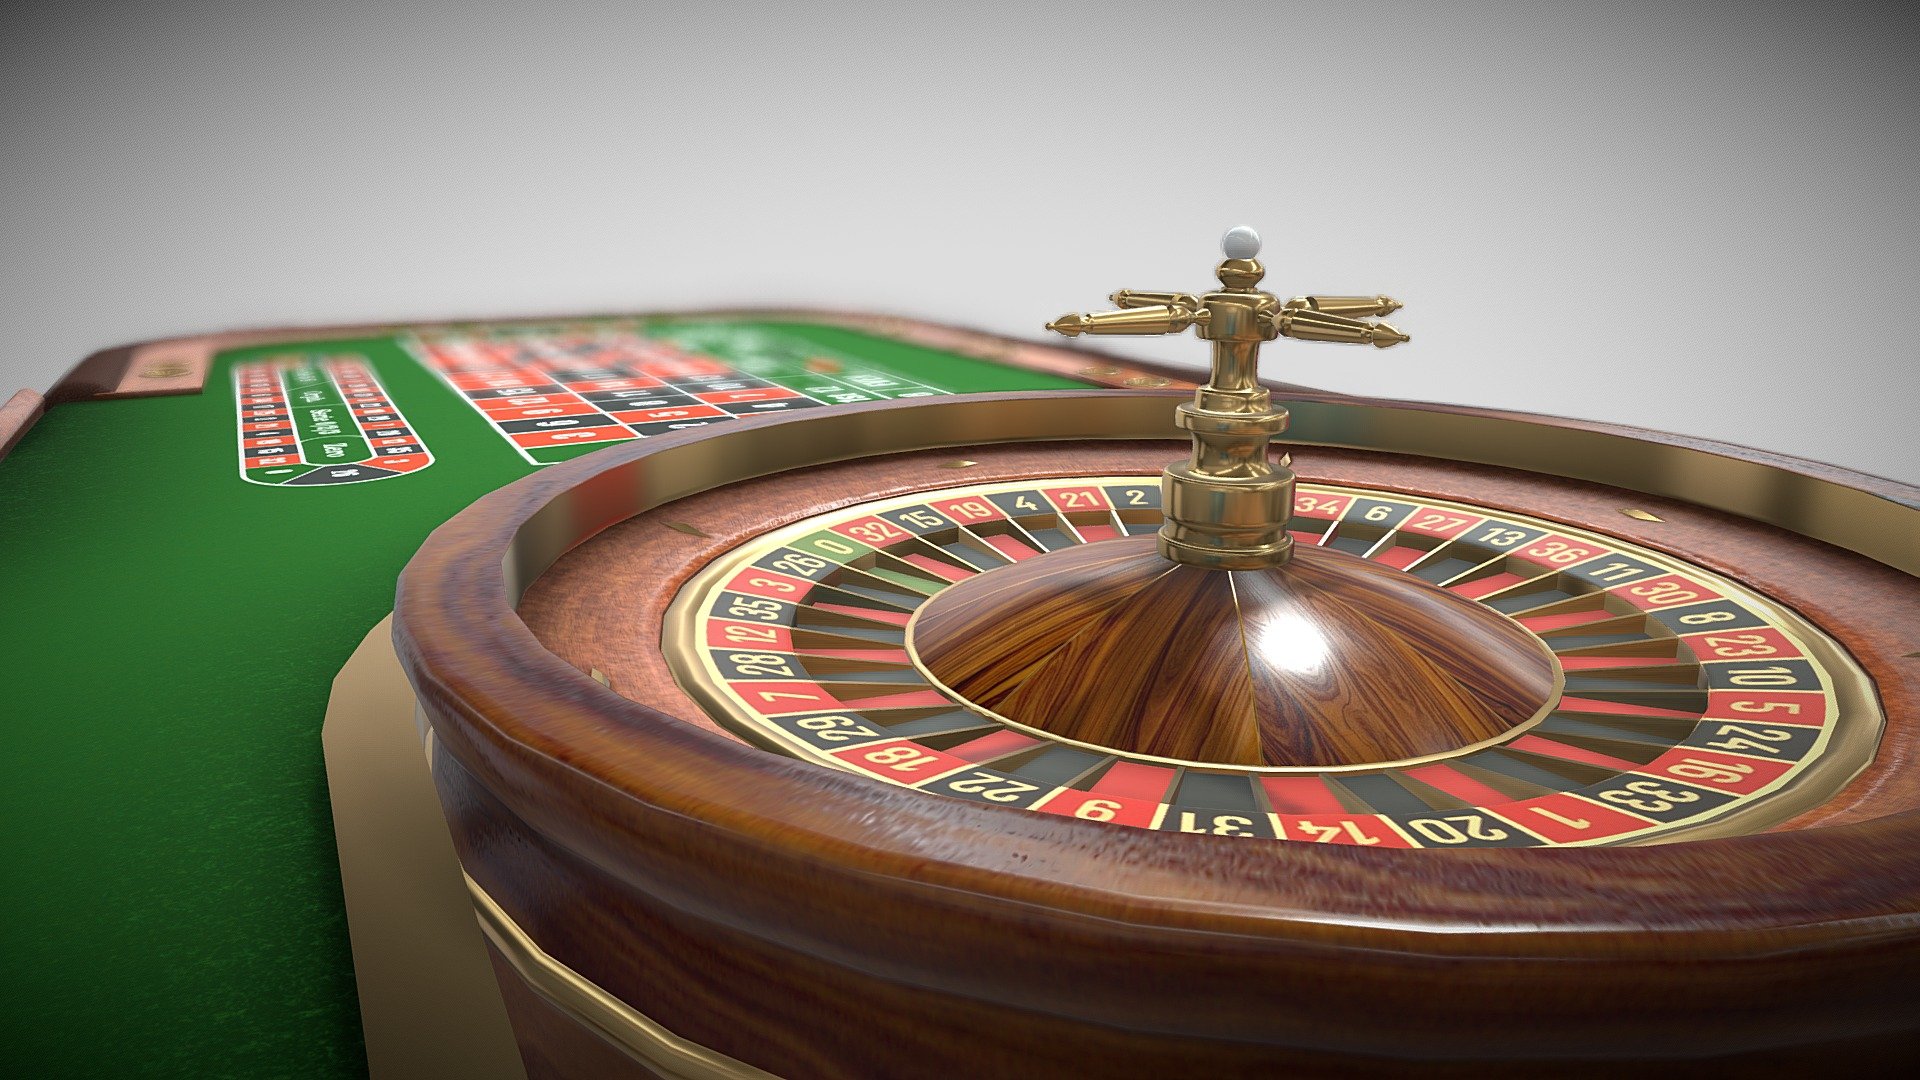 Casino Roulette Low-poly 3D model PBR Textures

To increase the speed of each artist in all tasks, we need a library of suitable models for various purposes. In this package, I prepared high-quality low-poly assets including a Roulette Table, Roulette Machine, and Roulette Chips PBR textures
The model has a standard quad topology that makes it easily editable if needed.
The model has proper UVs ready for the baking process.
Models can be used in all 3D software and render engines.
https://www.artstation.com/a/34745962

Available formats:

Fbx
Obj

After purchasing this product you will get the following:

Low poly 3d model including:
Roulette Table
Roulette Machine
Roulette Chips
Shoes (Boot)
PBR Texture 4096*4096 - Casino Roulette Low-poly 3D model PBR Textures - 3D model by s.javadhashemi 3d model